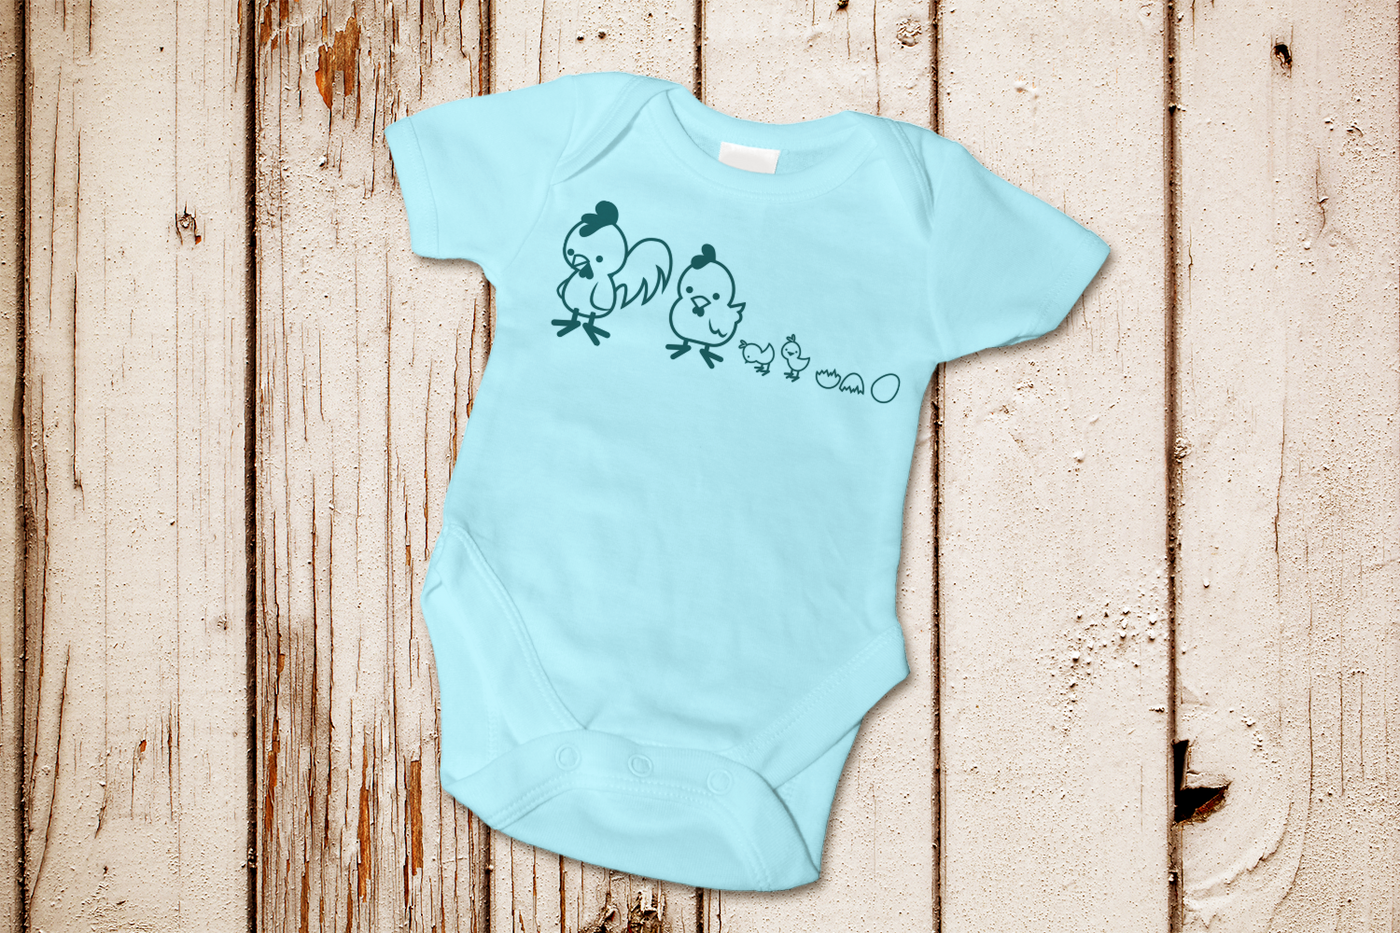 Chicken family on a baby onesie, as a single color design.